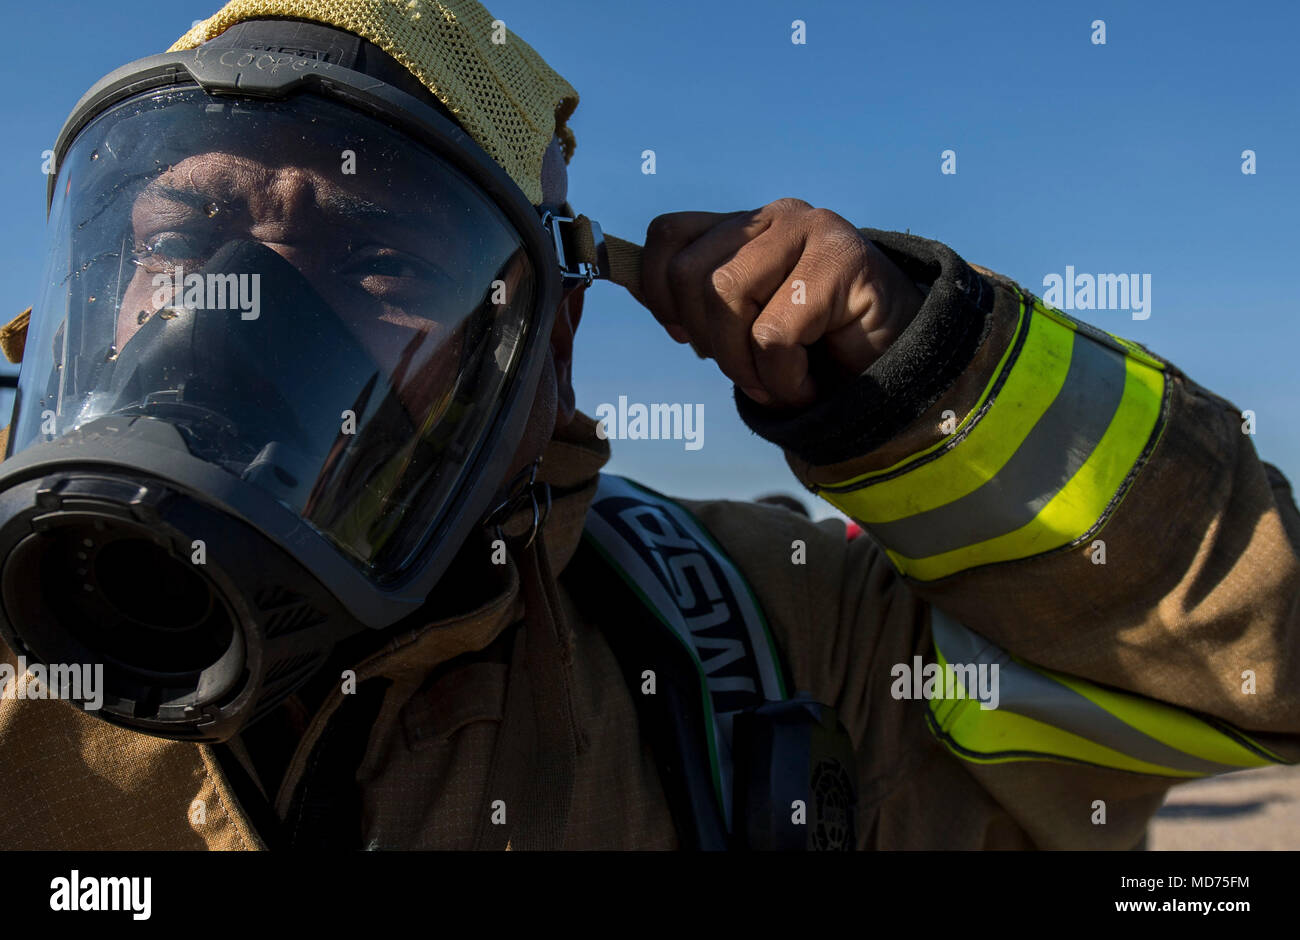 Captain Korell Cooper, Shreveport Fire Department firefighters, gears up for an annual recertification burn at Barksdale Air Force Base, La., March 21, 2018. Utilizing the burn pit on Barksdale allows the SFD to save approximately $30,000. (U.S. Air Force photo by Airman 1st Class Tessa B. Corrick) Stock Photo